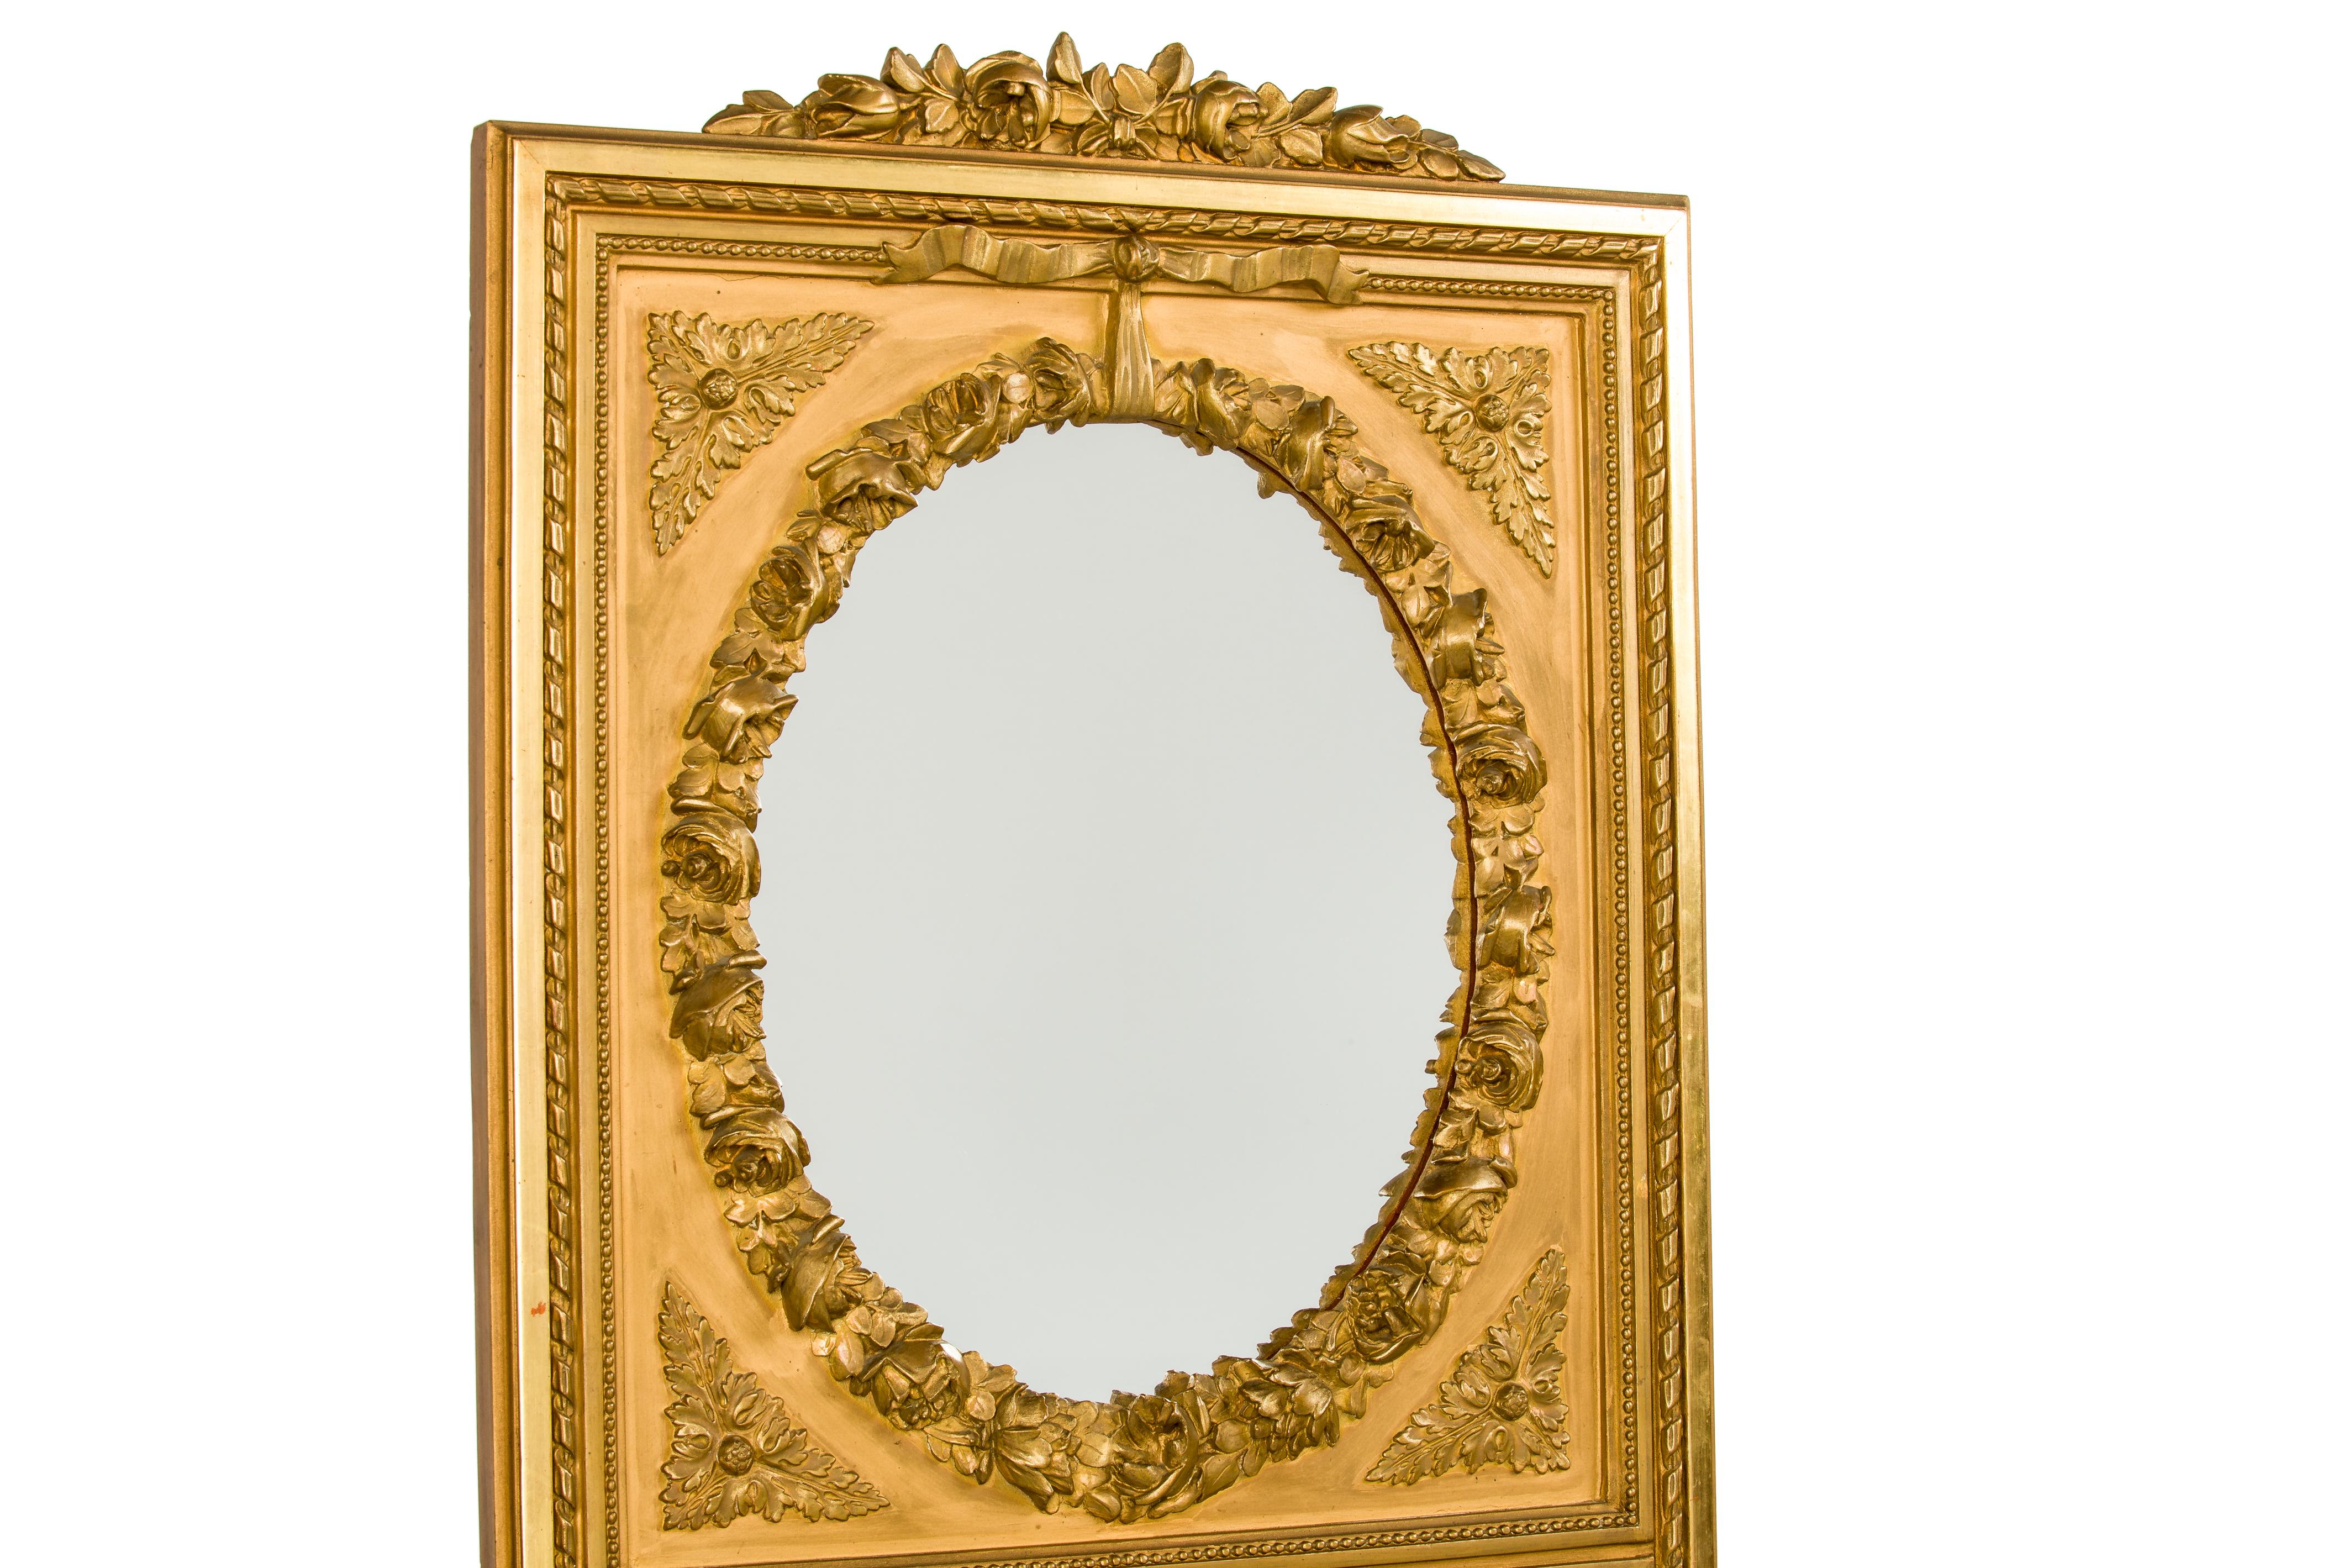 A very handsome and tall pier mirror that was made in the late 19th century in Northern France. Its square frame, decorative borders, and crest are typical for the Louis Seize style. The modest crest features beautiful roses with leaves. Below is a